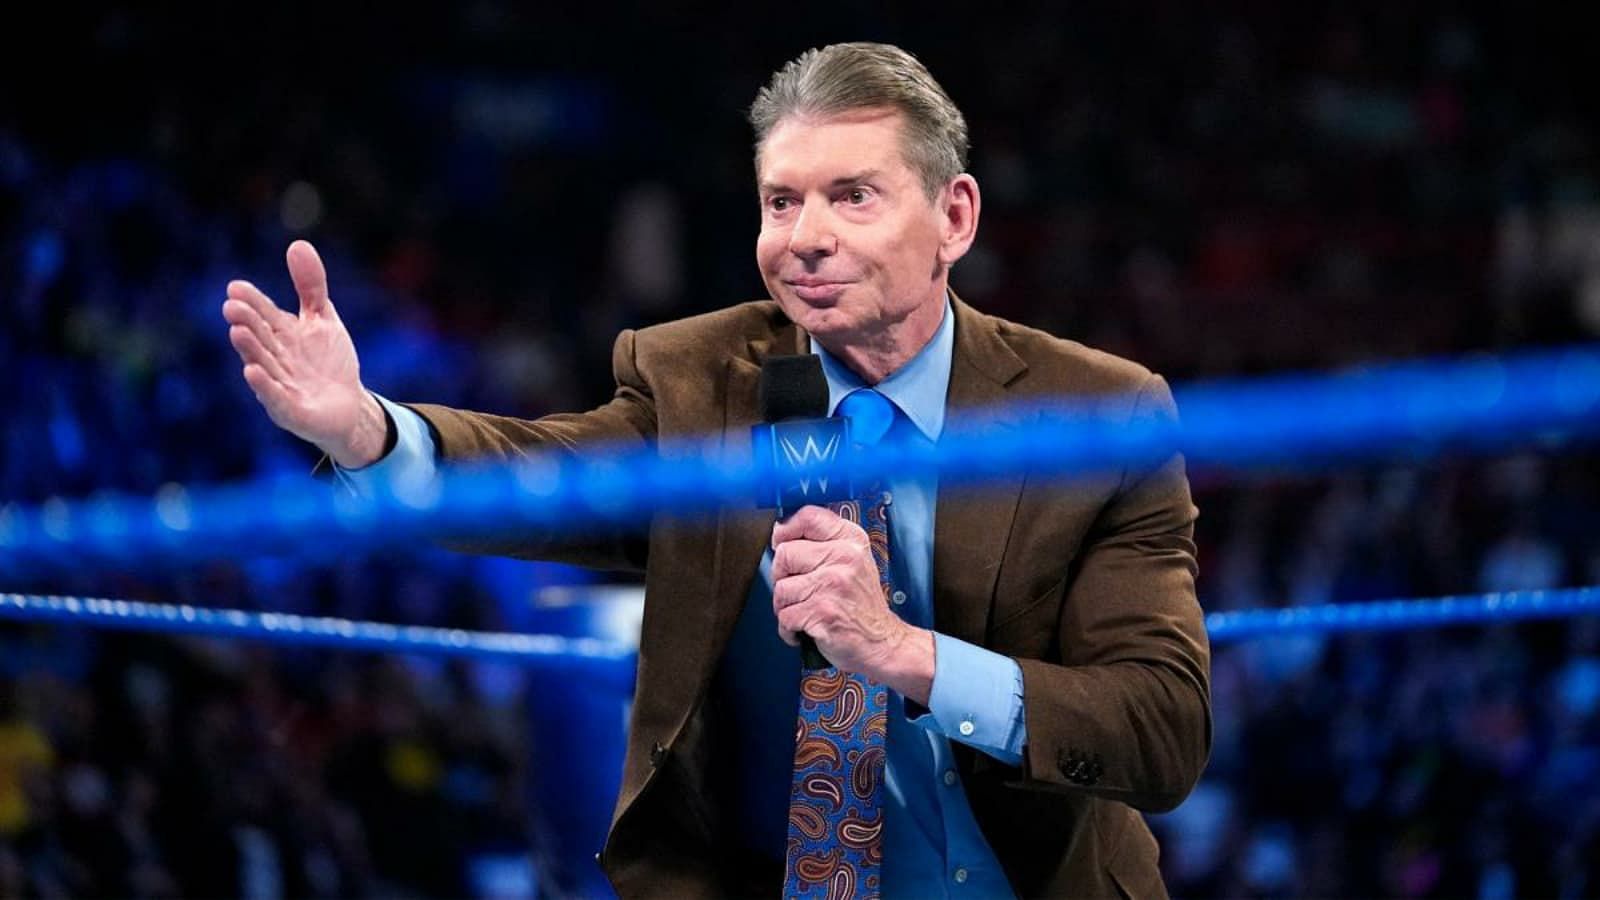 Vince McMahon was mighty impressed with Fandango.